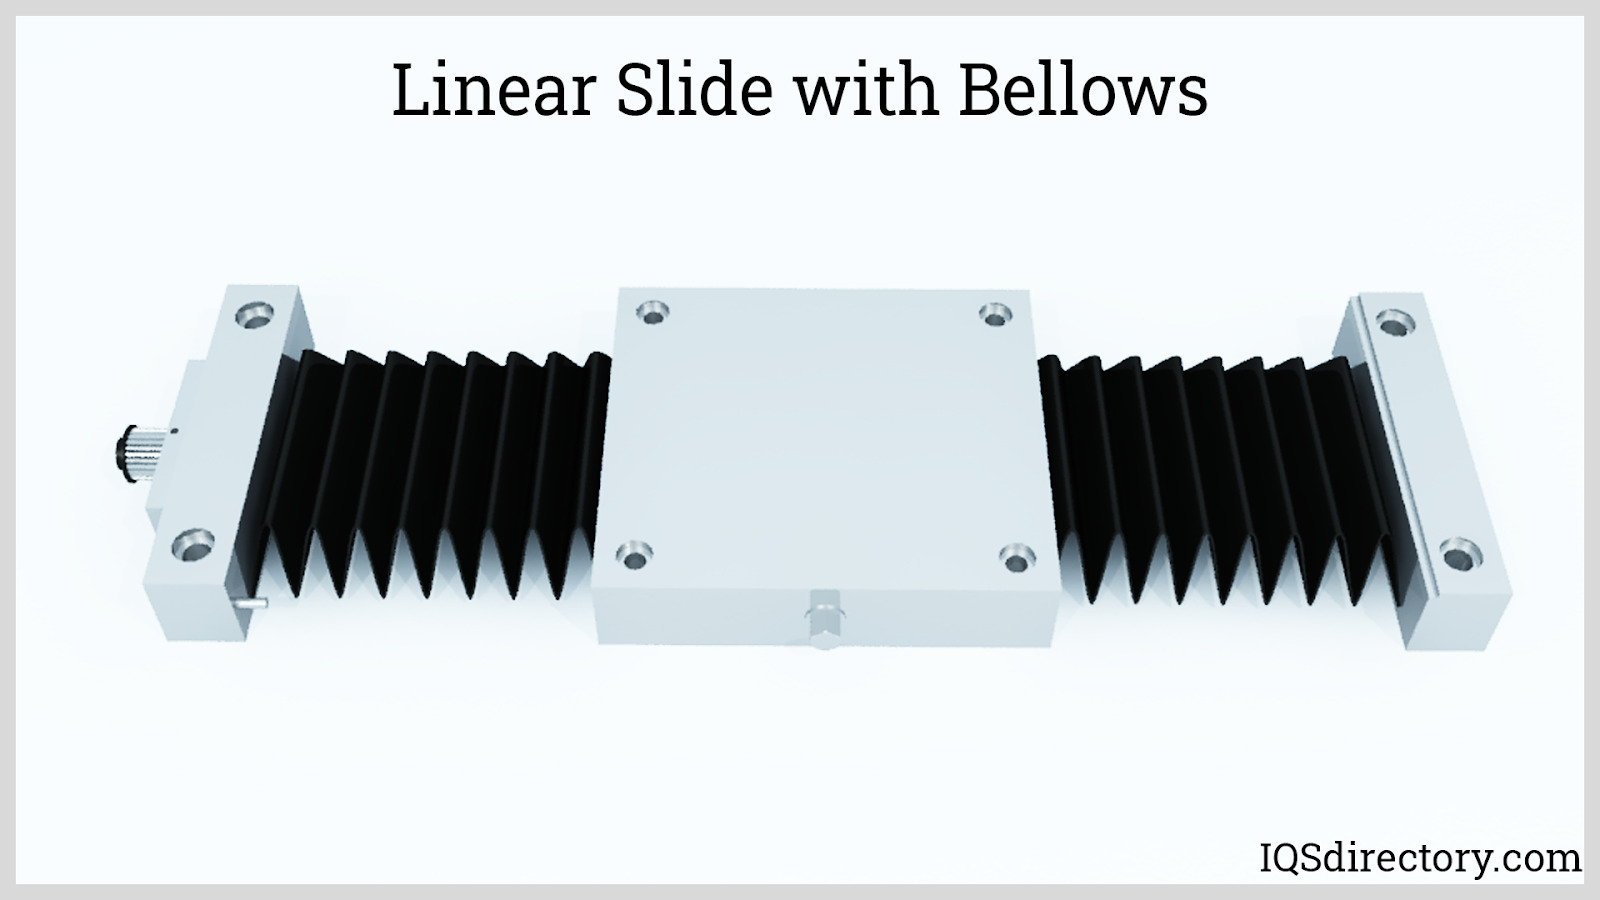 Linear Slide with Bellows